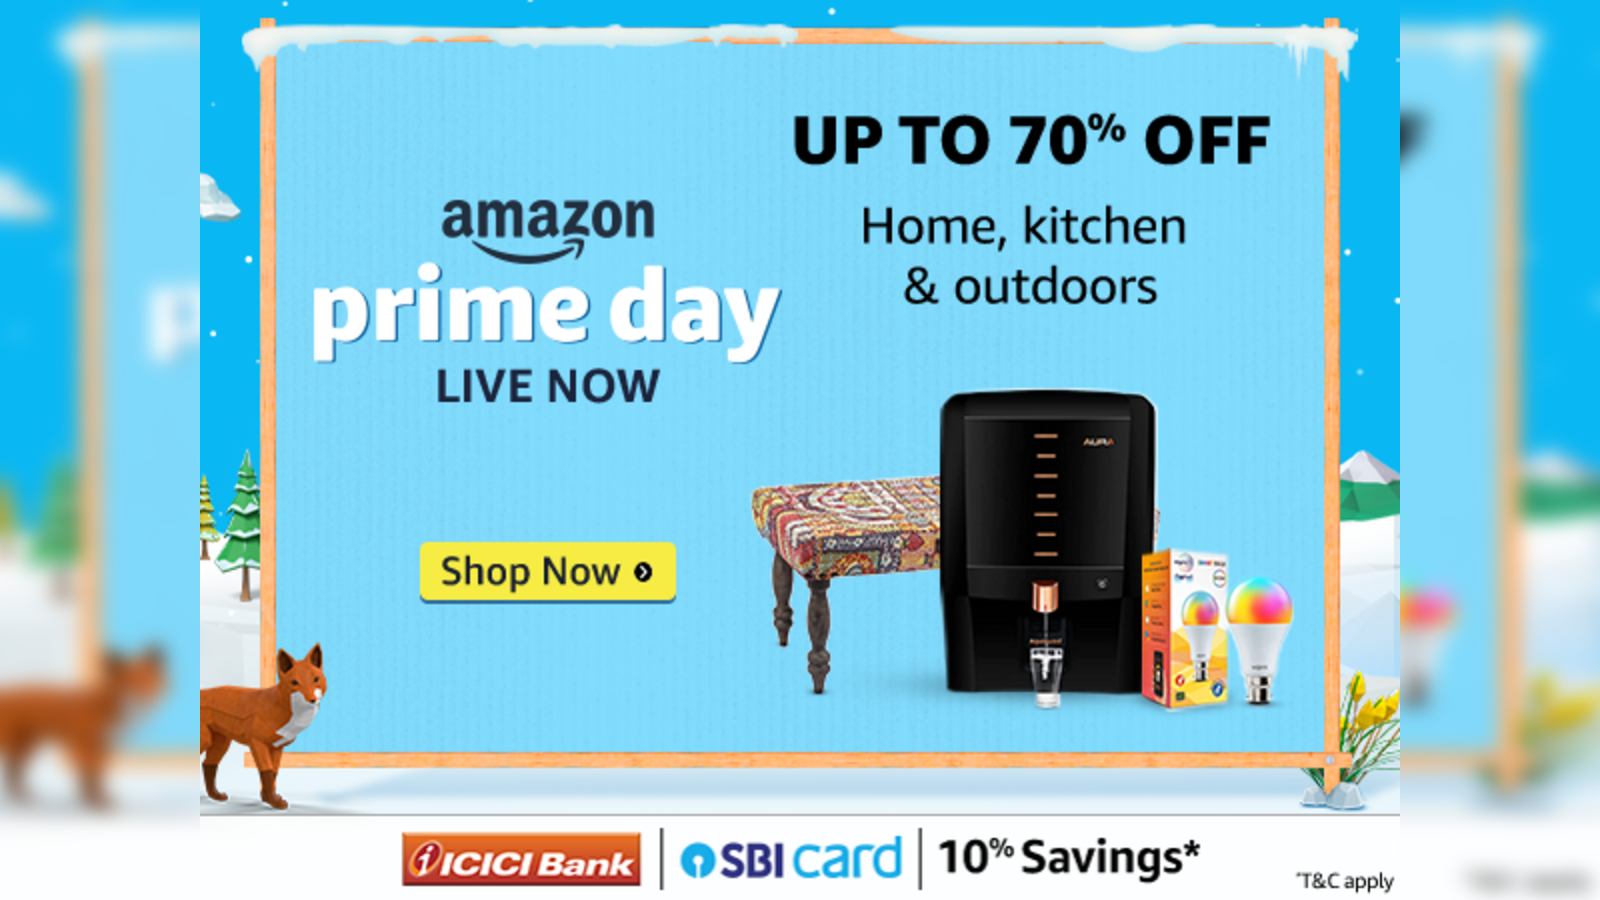 sale:  Prime Day Sale ends today: Seize the Best